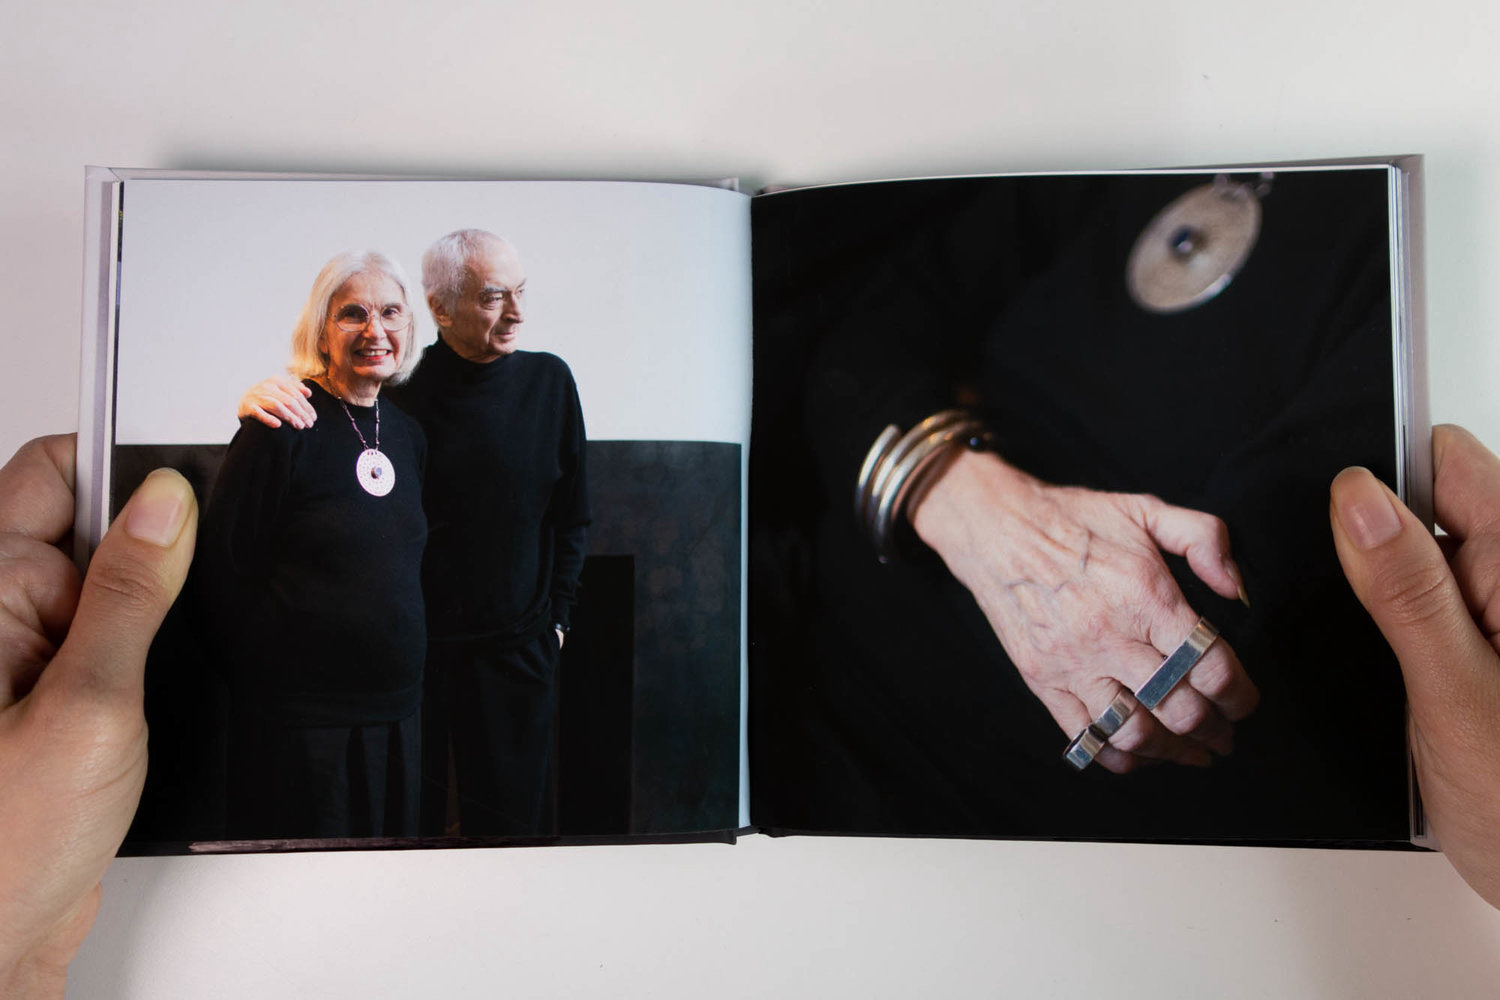 an open book with an image of Lella and Massimo Vignelli on the left
									 a hand with rings on the right page.